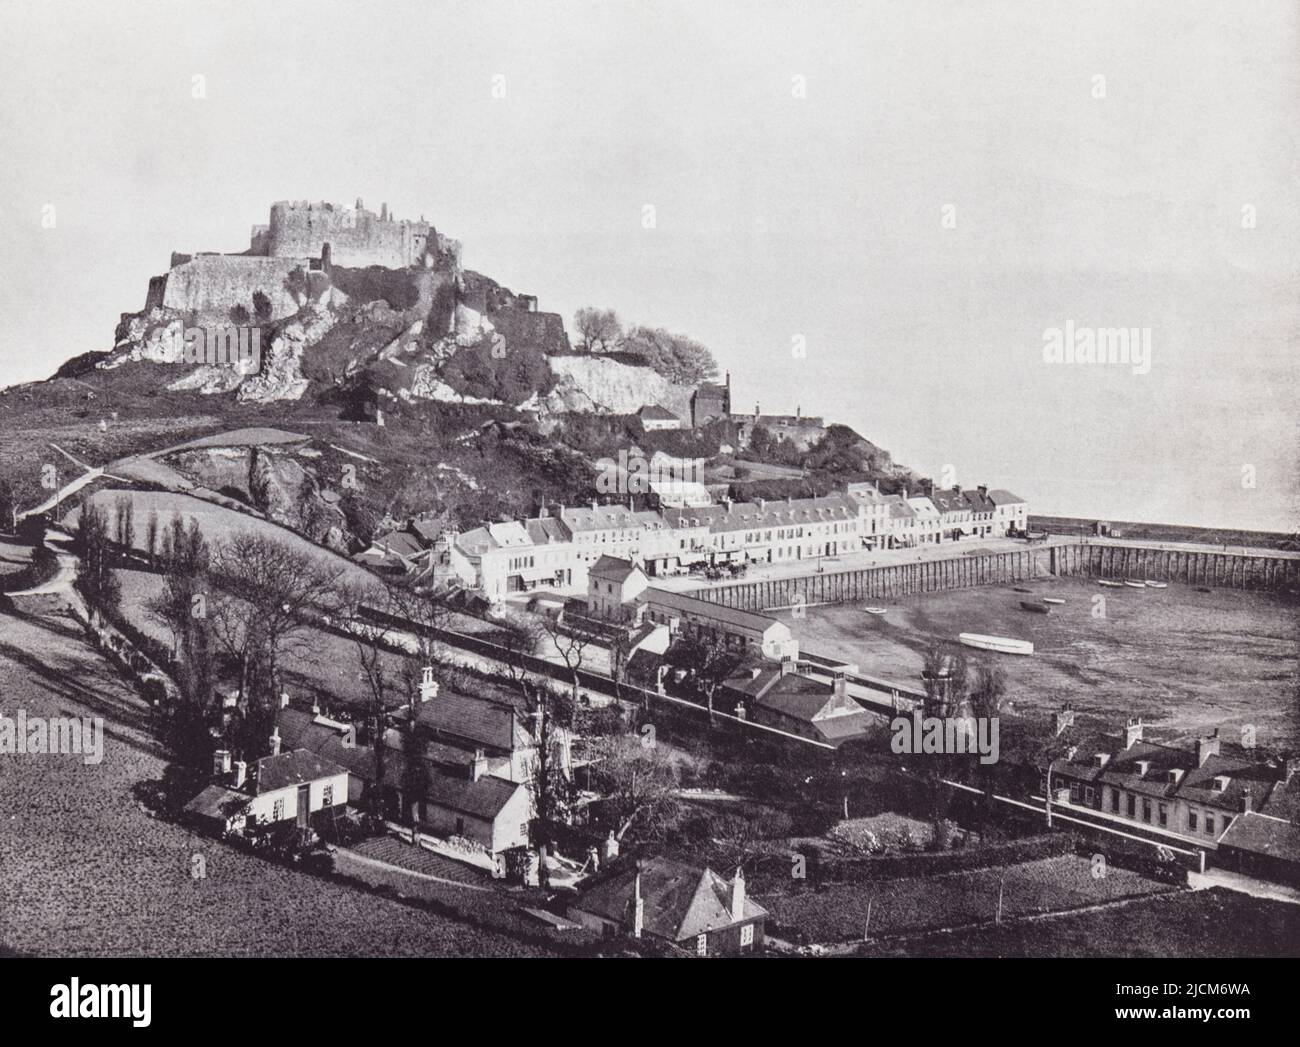 Saint Martin, Jersey, Channel Isalnds, English Channel.  Gorey and Mont Orgueil Castle seen here in the 19th century.  From Around The Coast,  An Album of Pictures from Photographs of the Chief Seaside Places of Interest in Great Britain and Ireland published London, 1895, by George Newnes Limited. Stock Photo